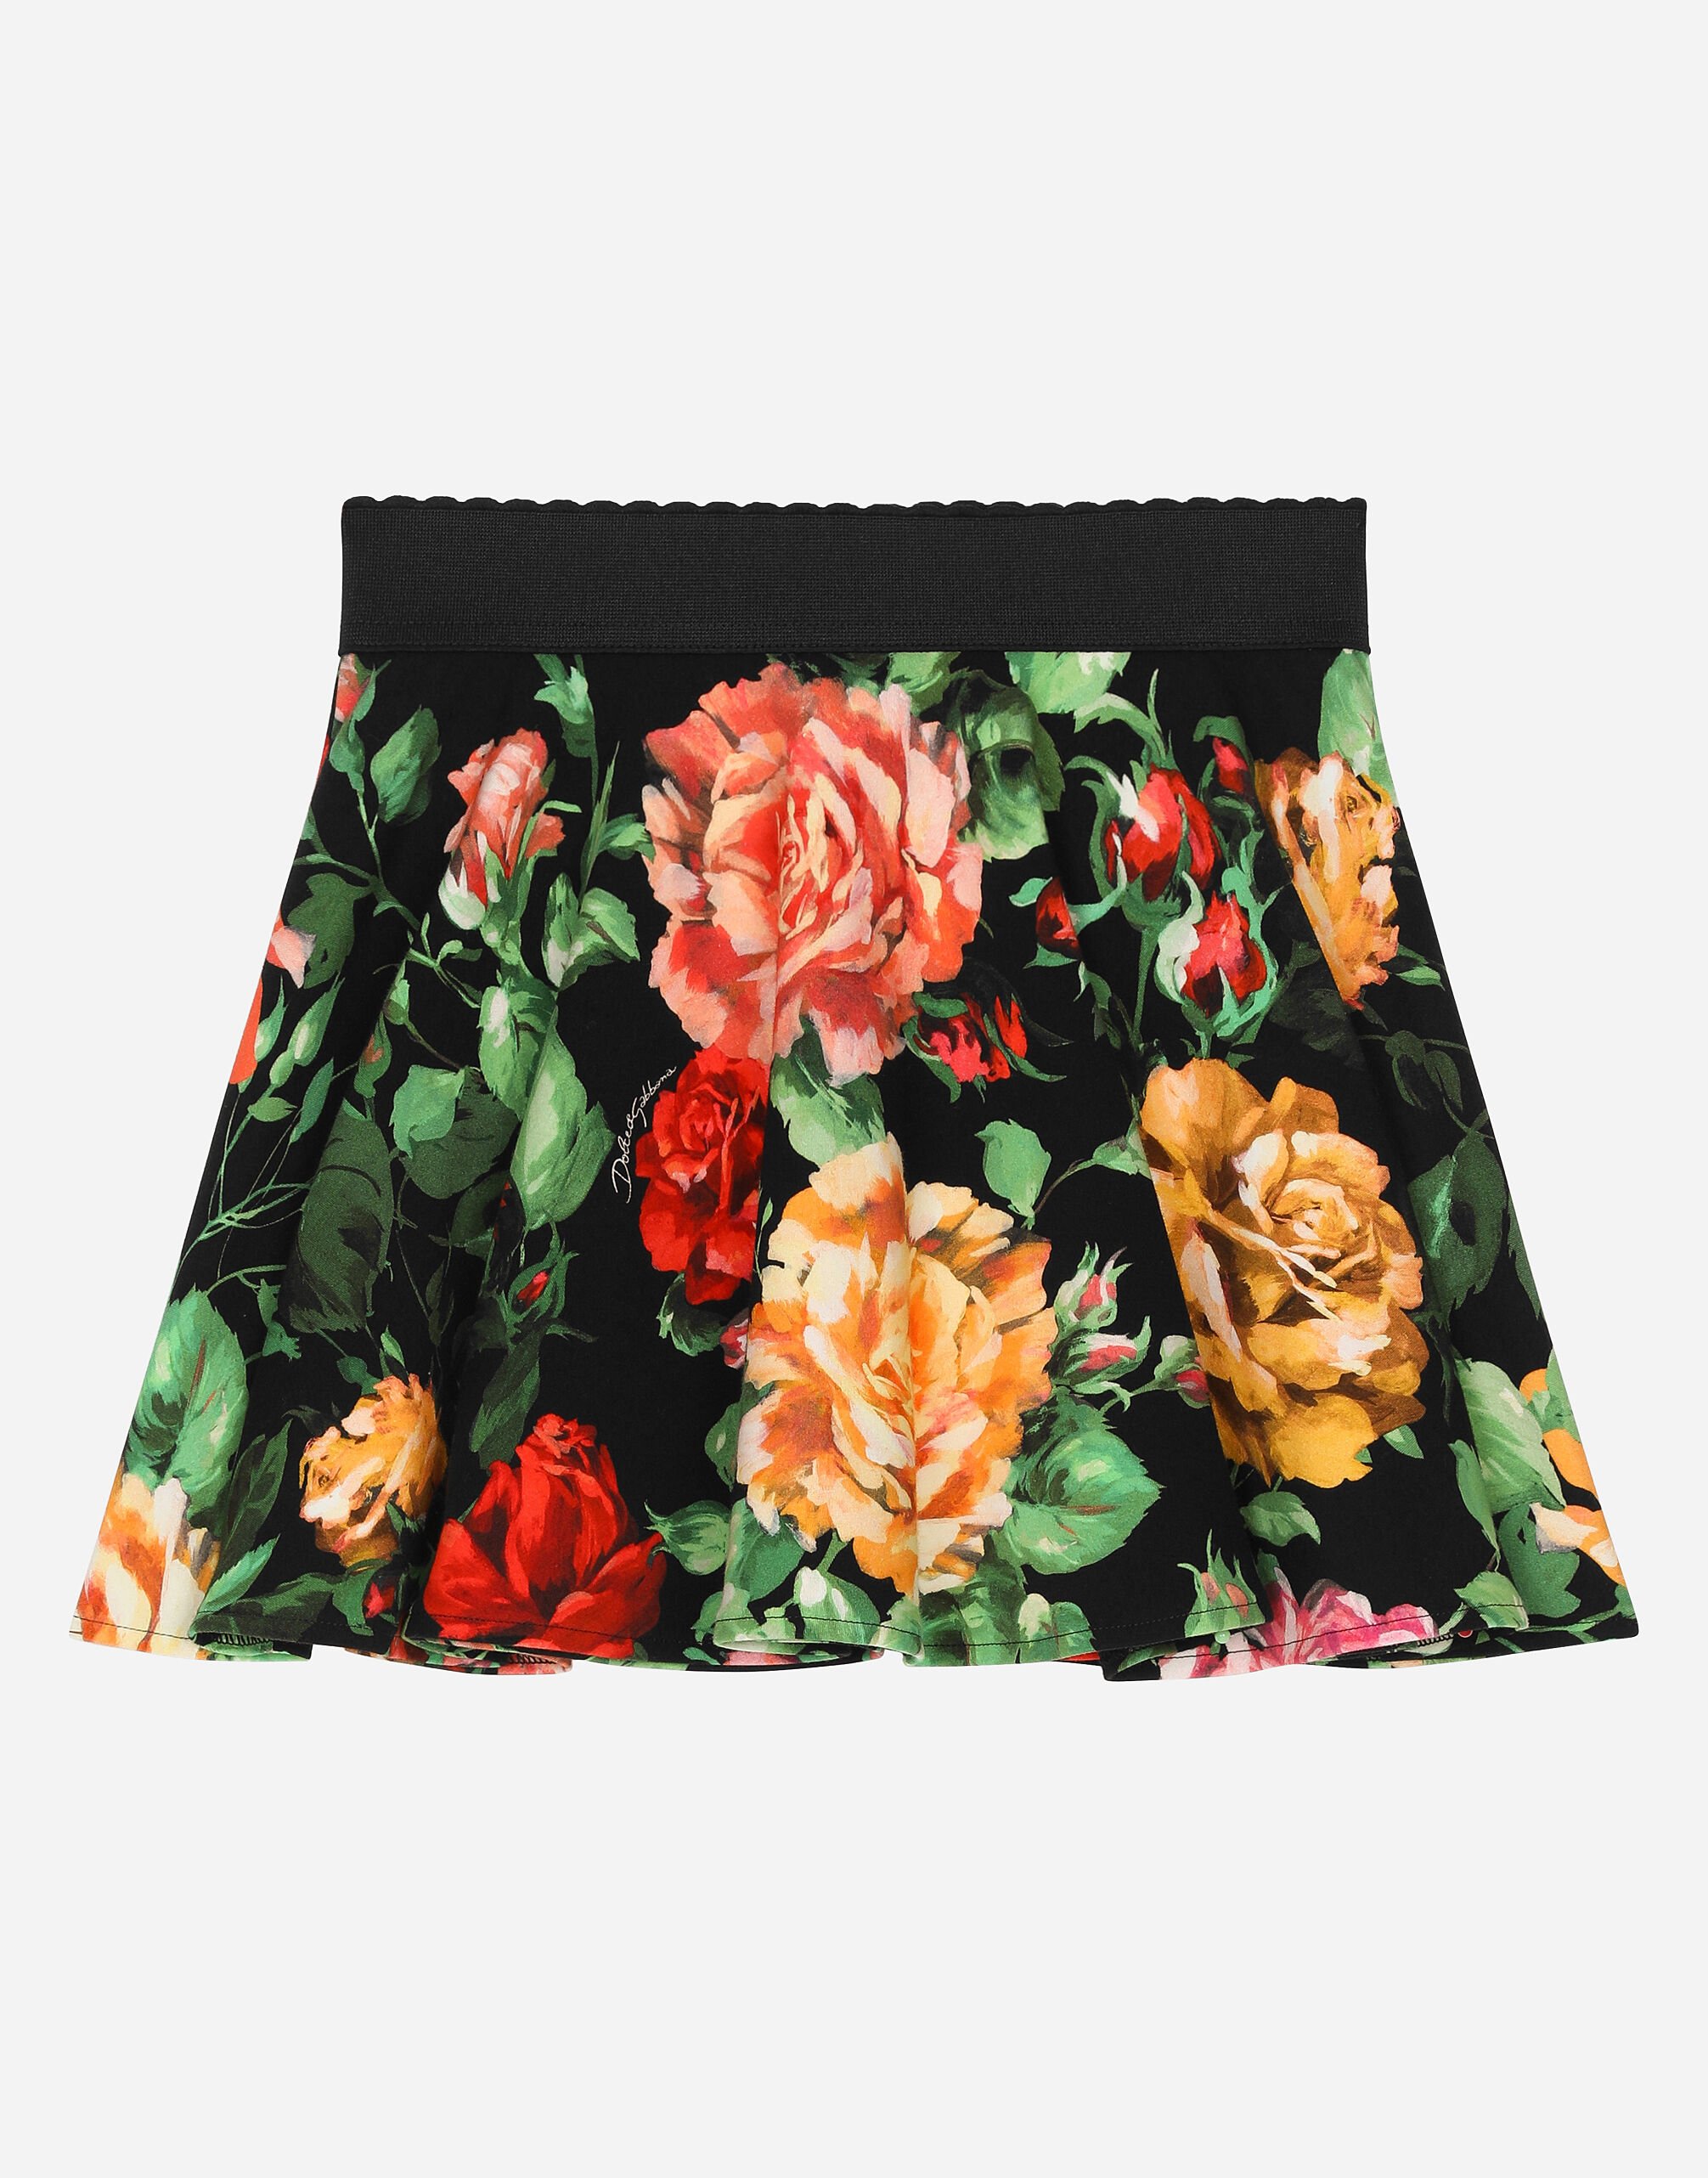 ${brand} Interlock skirt with rose print over a black background ${colorDescription} ${masterID}